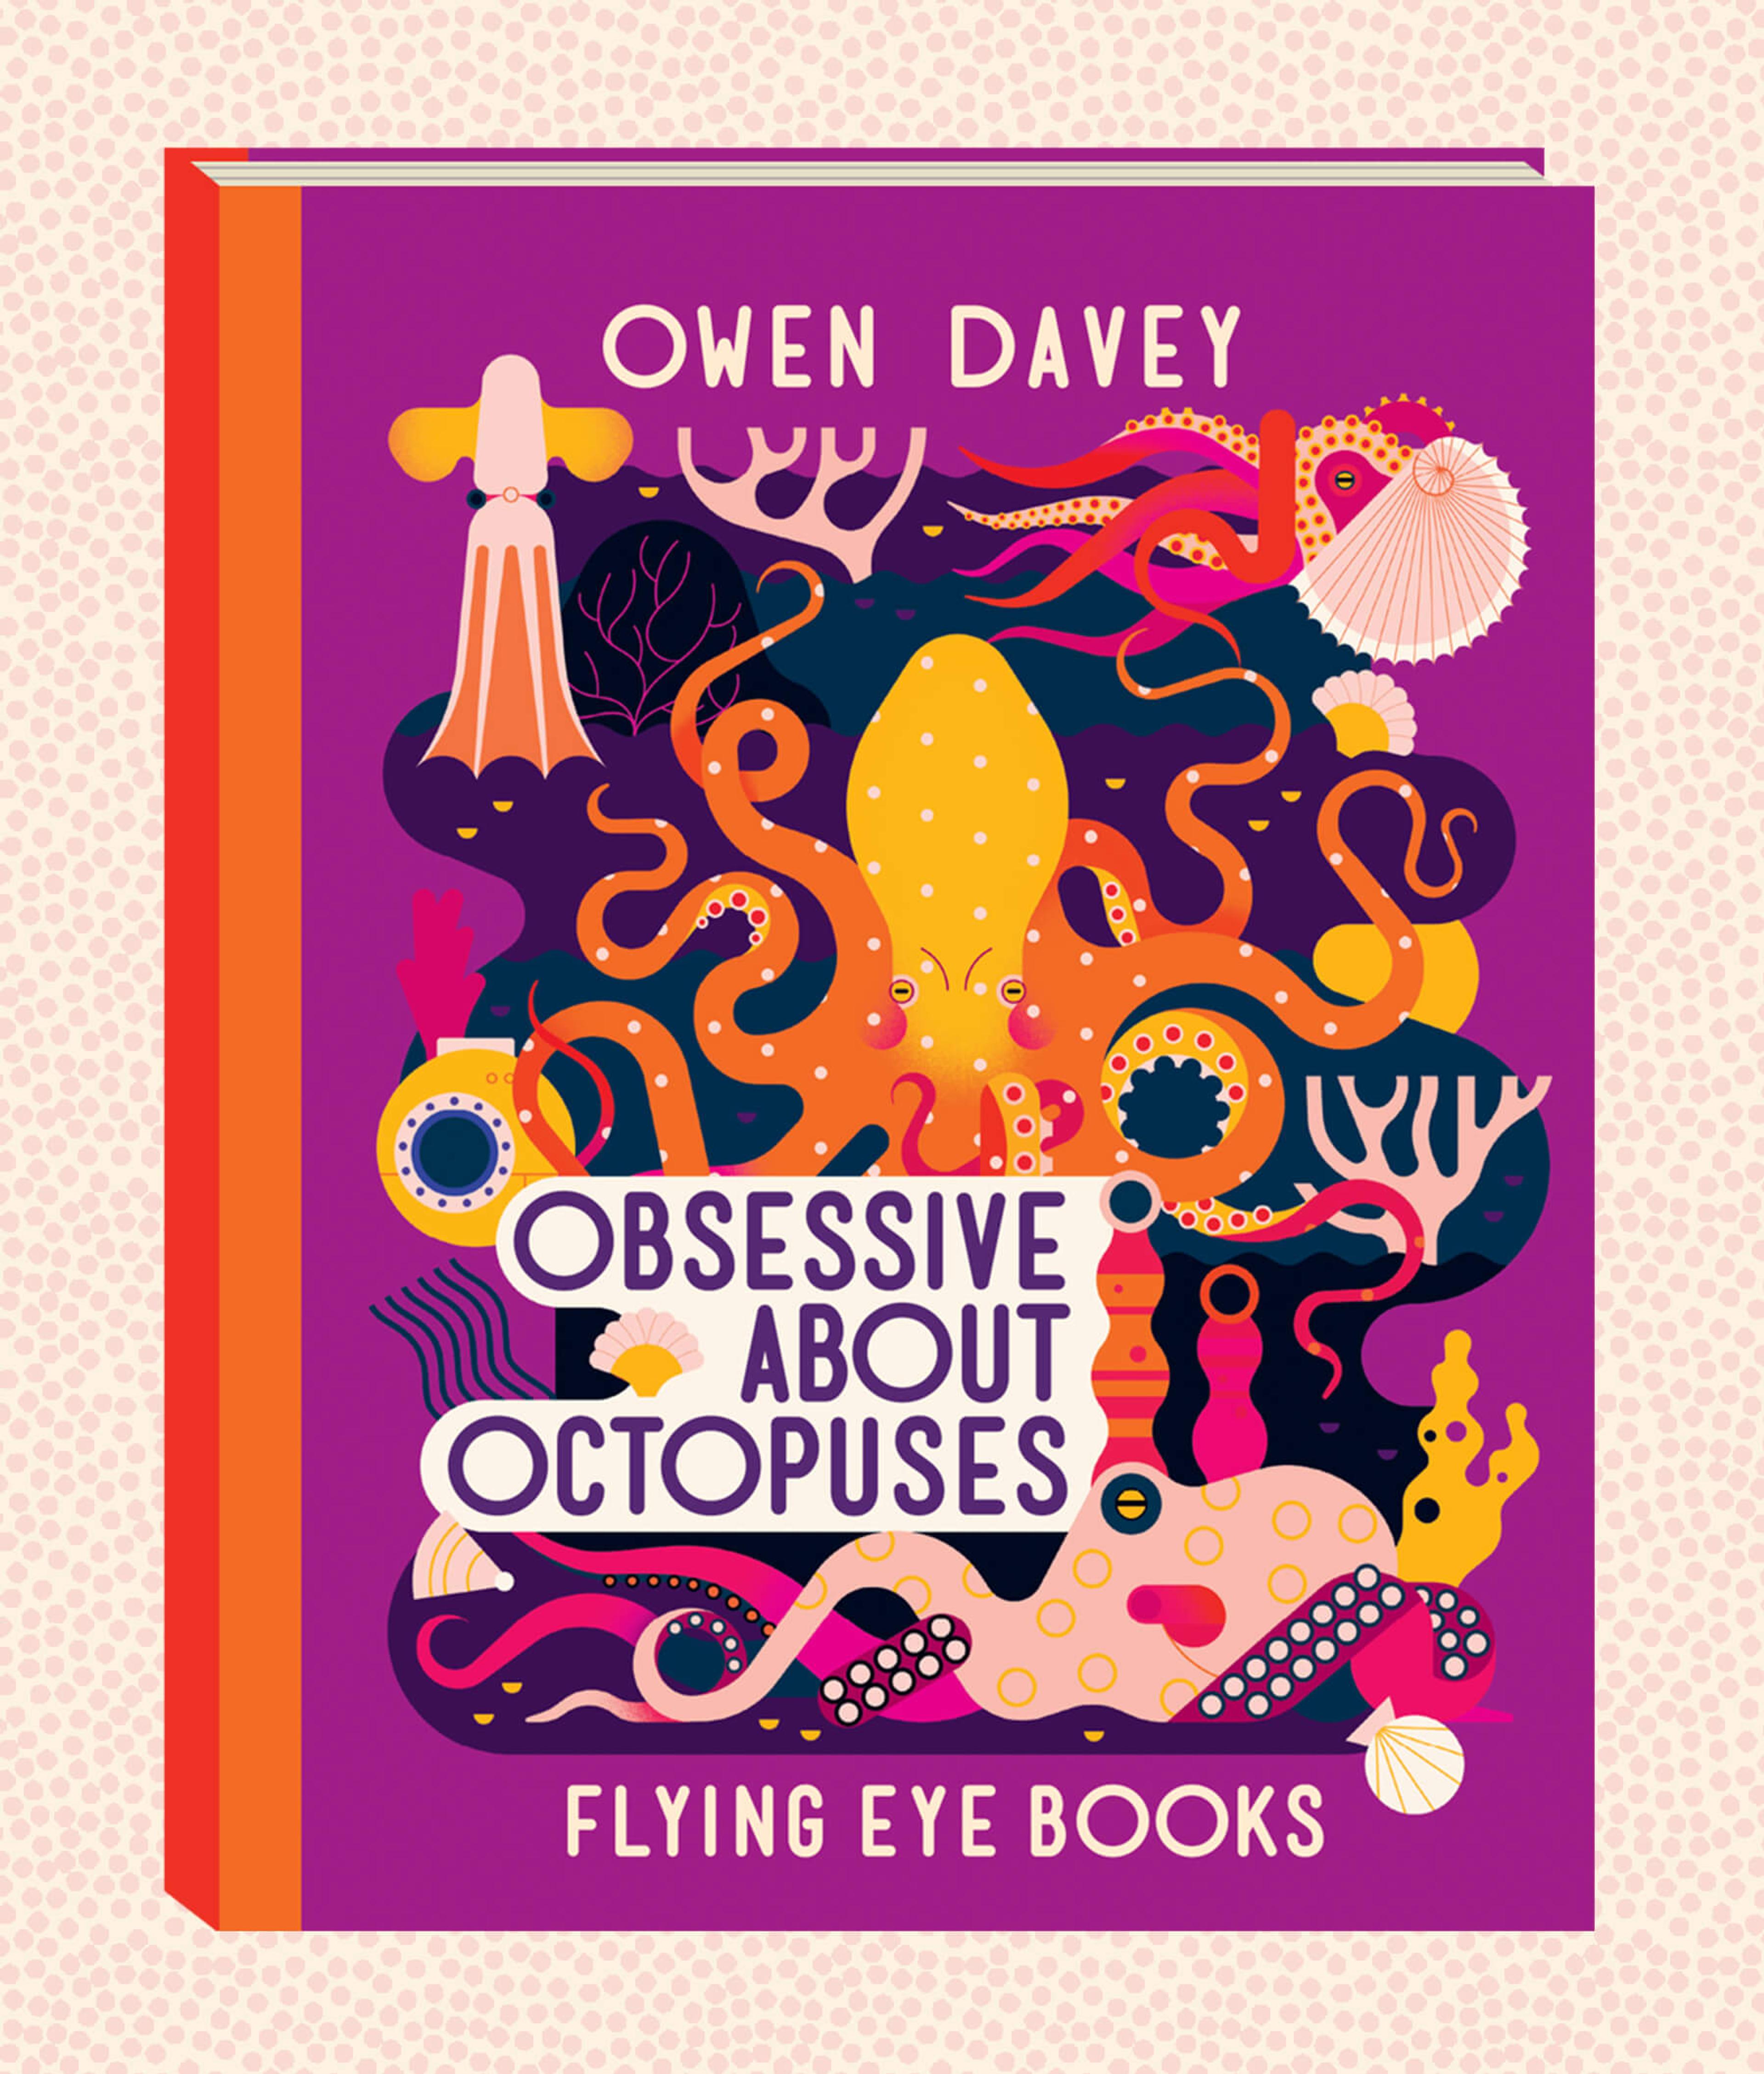 Illustration of the front cover of the book Obsessive About Octopuses by Owen Davey.